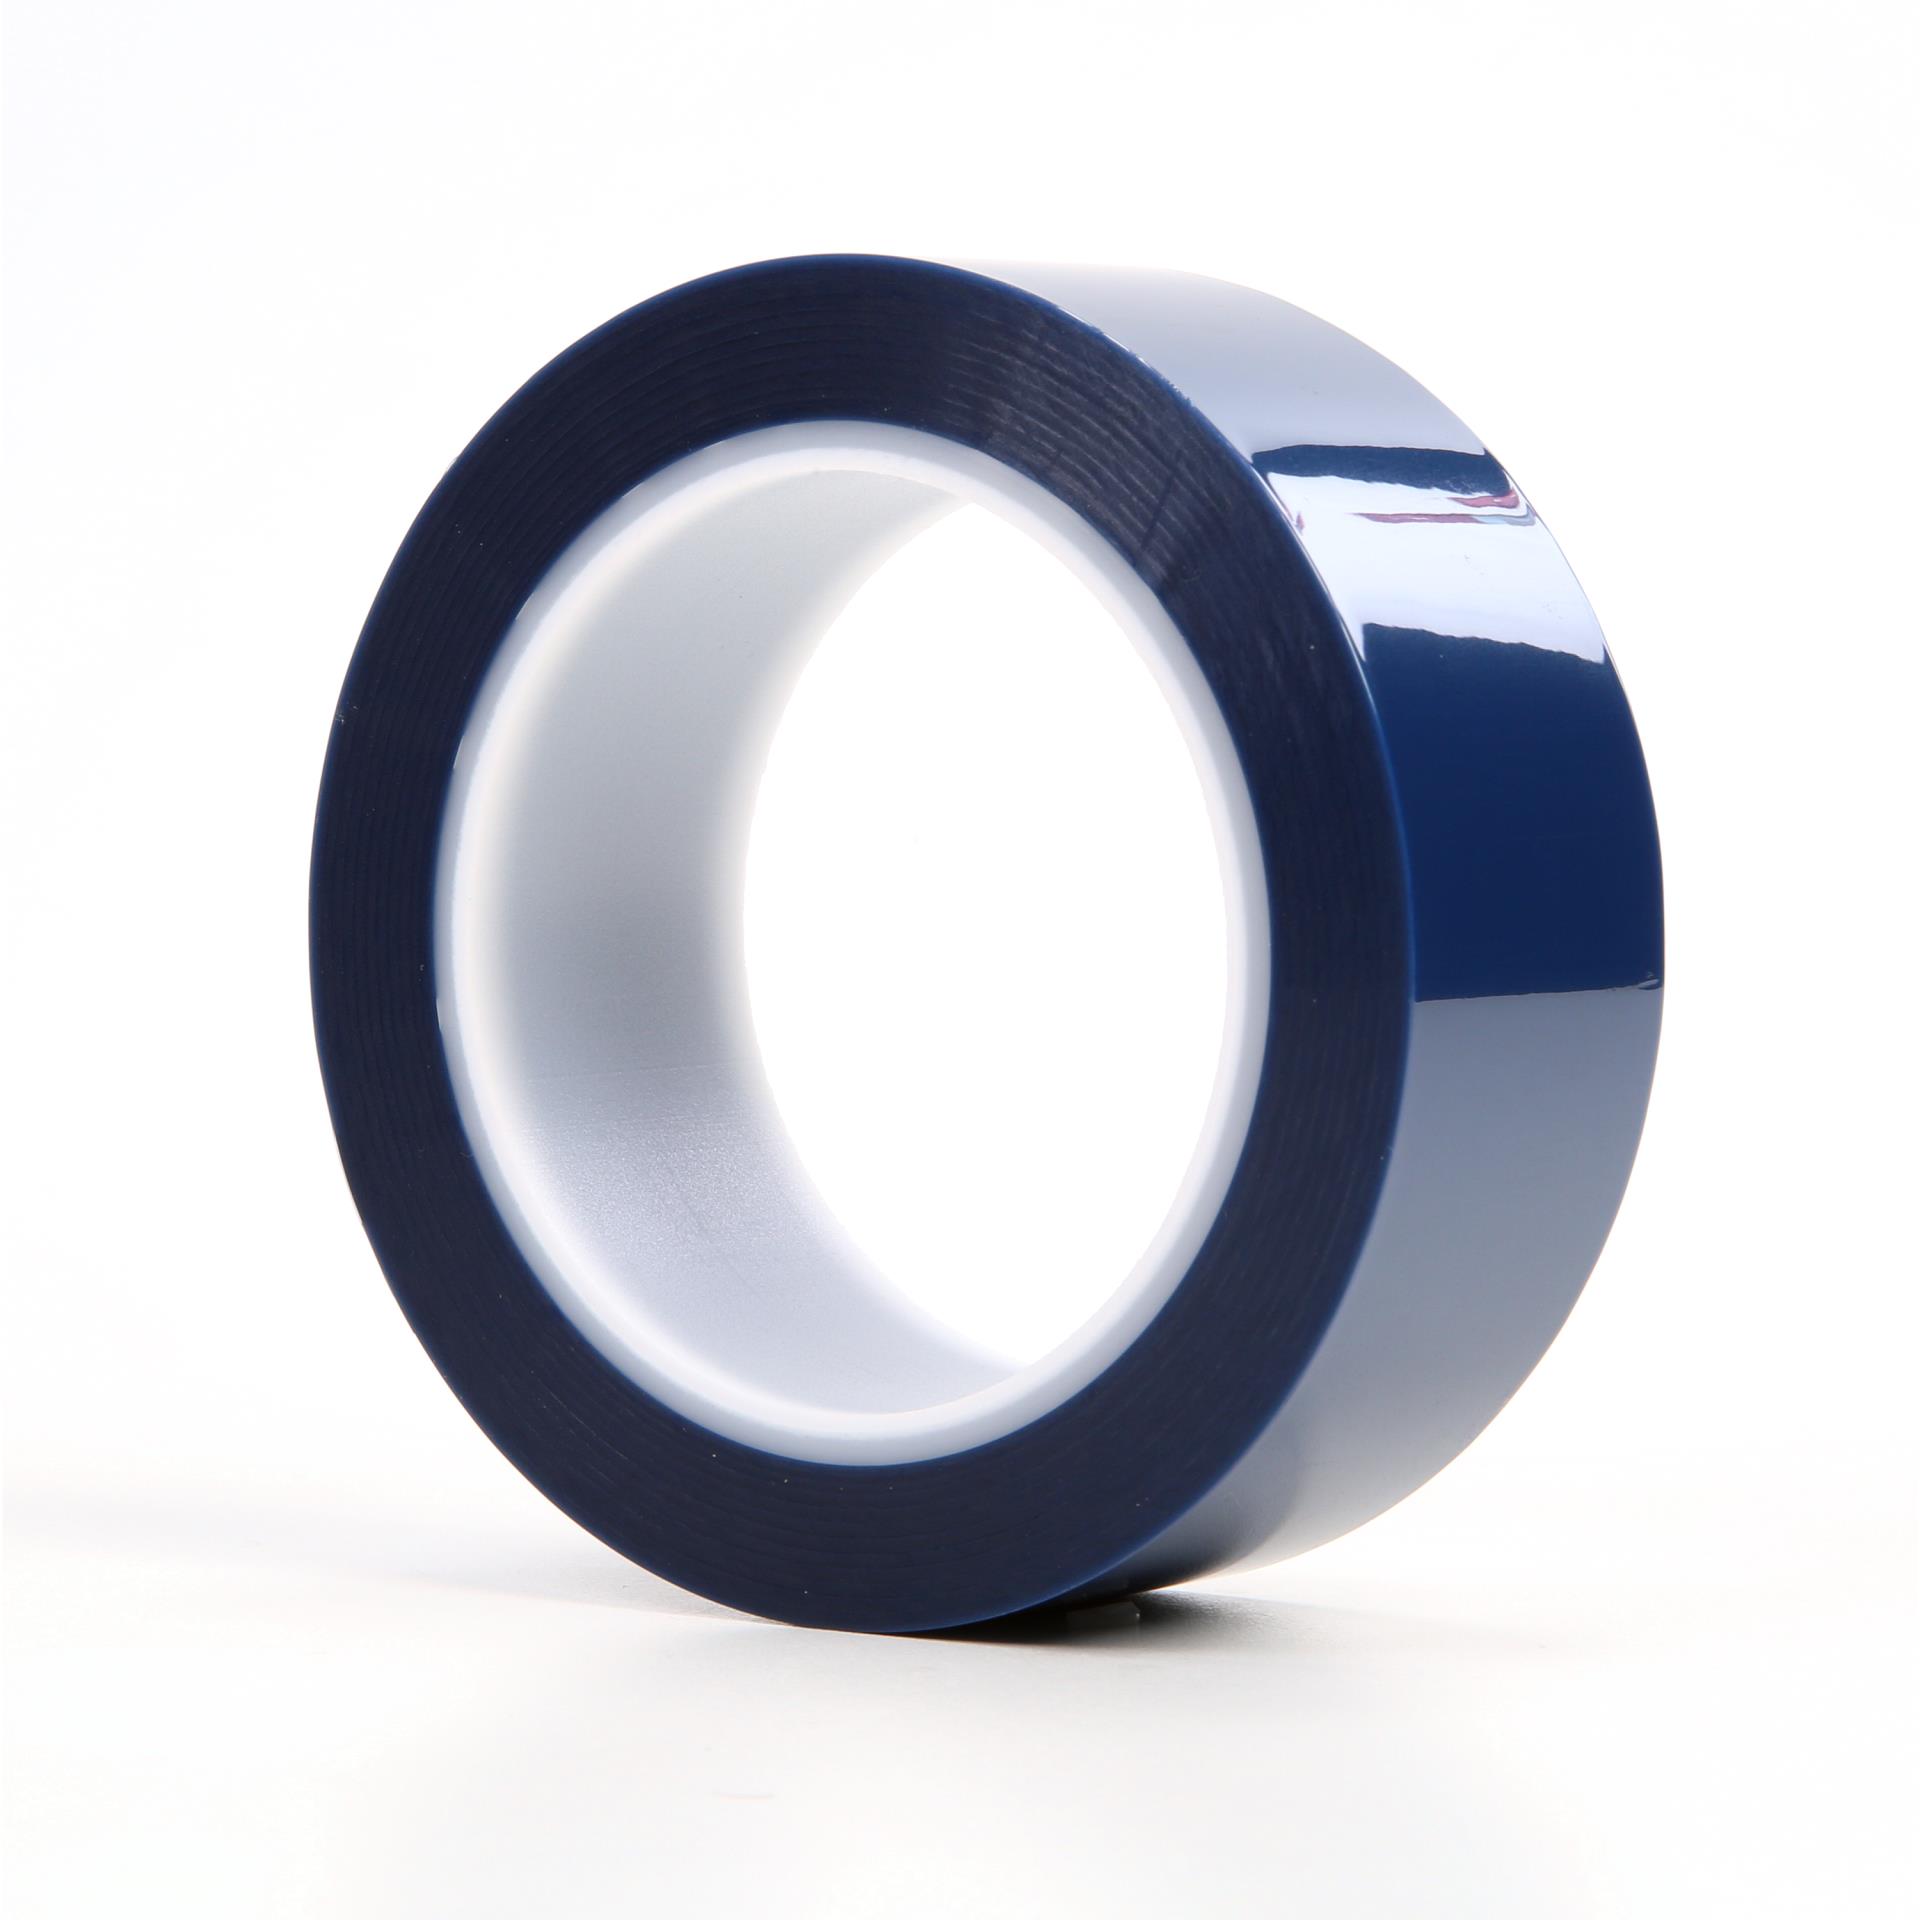 00051115647314 3M™ Polyester Tape 8991, Blue, 1/2 in x 72 yd, 2.4 mil,  24 rolls per case Aircraft products polyester-tapes 9378845